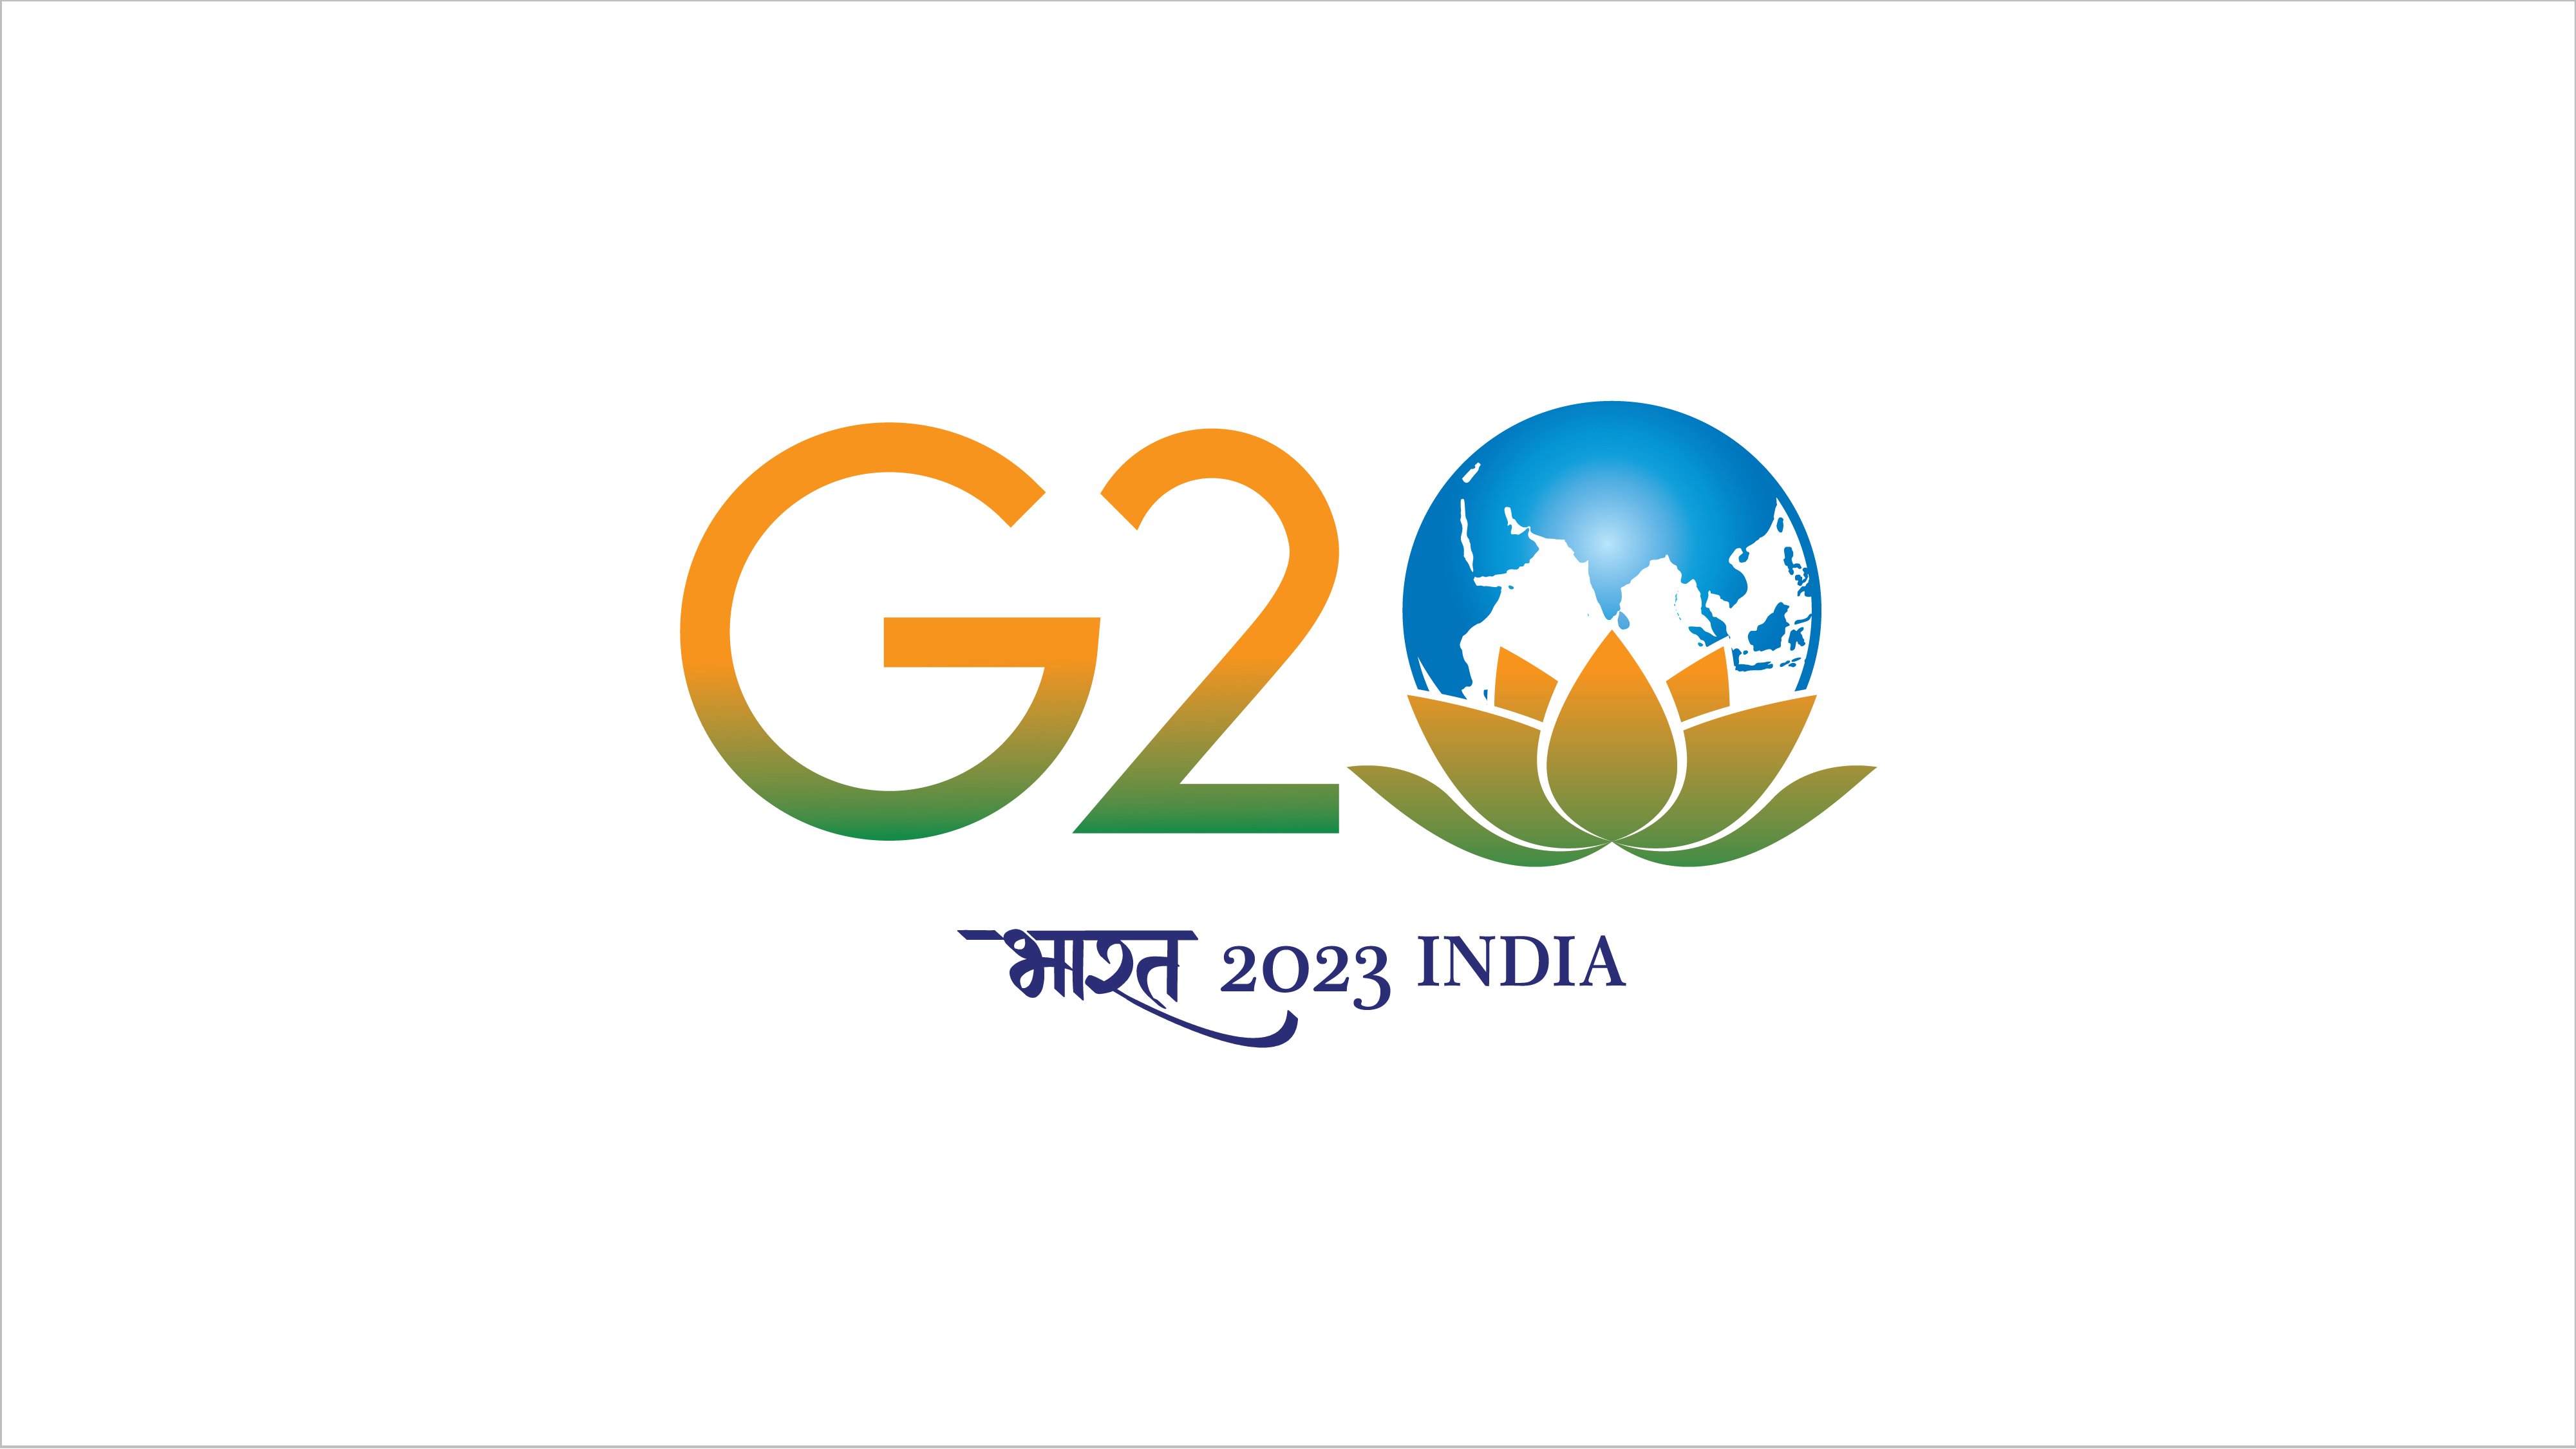 India G20: First Infrastructure Working Group Meet in Pune